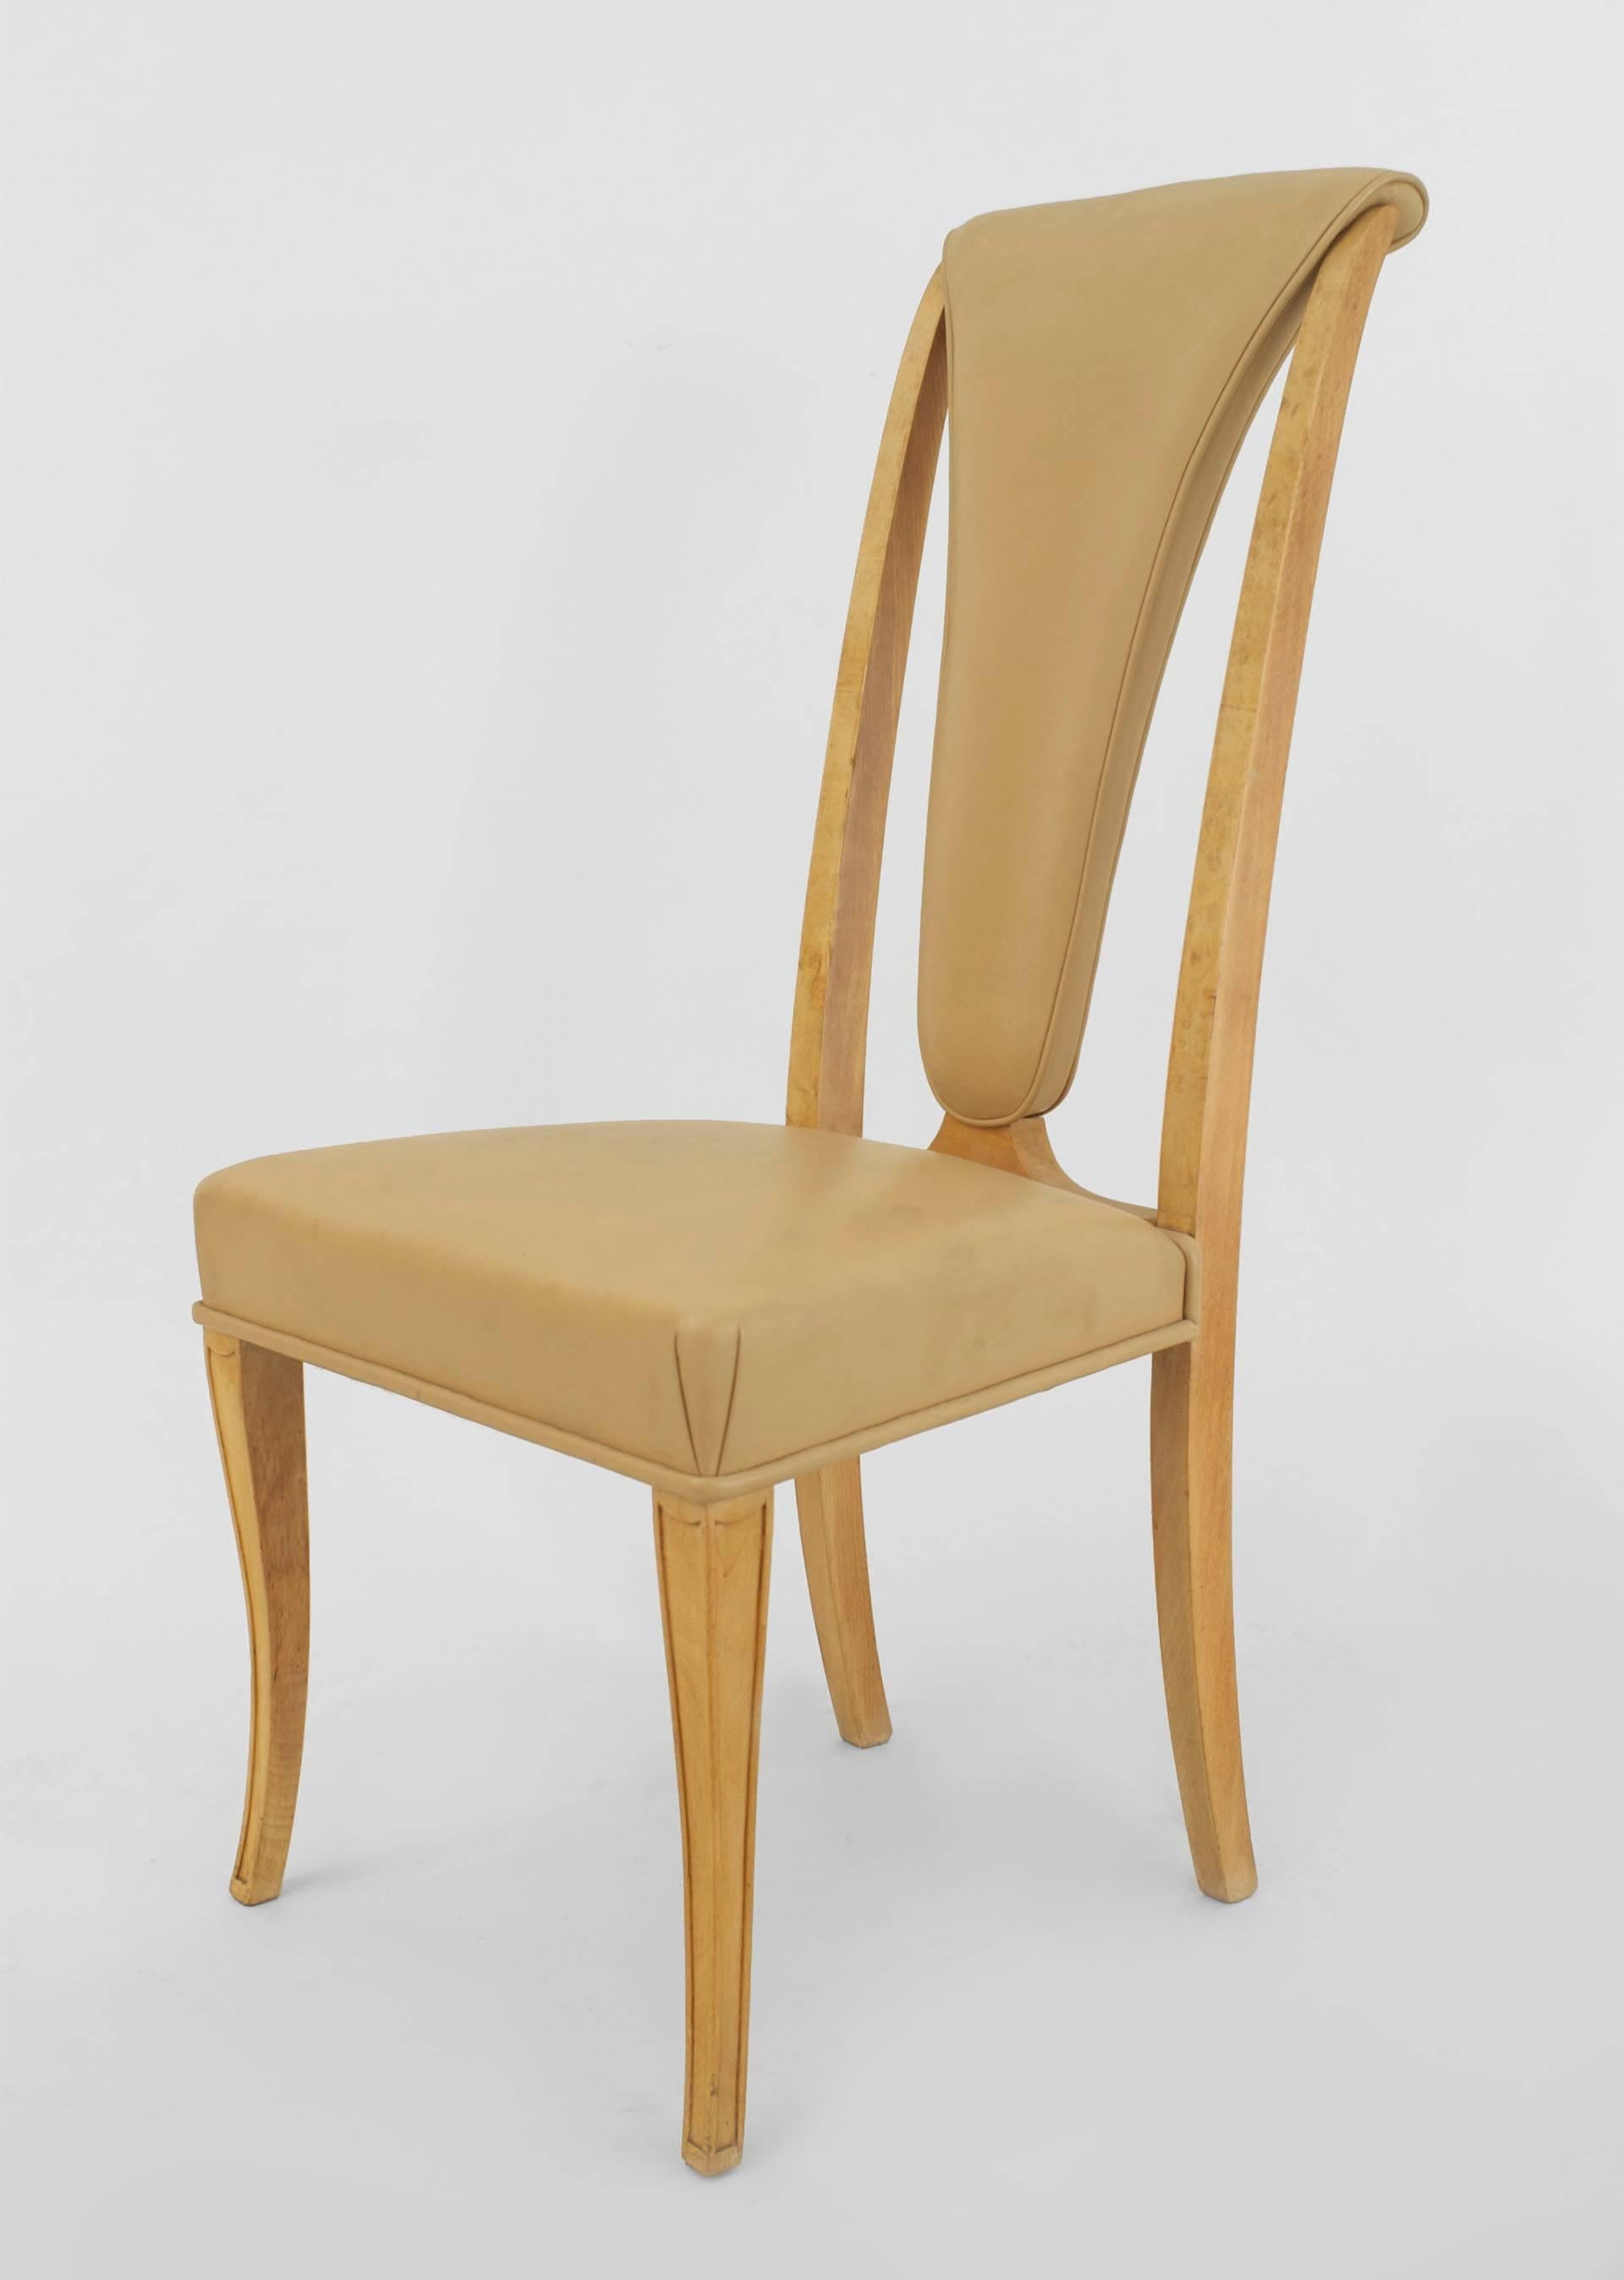 Set of 8 English Art Deco Leather Dining Chairs For Sale 1